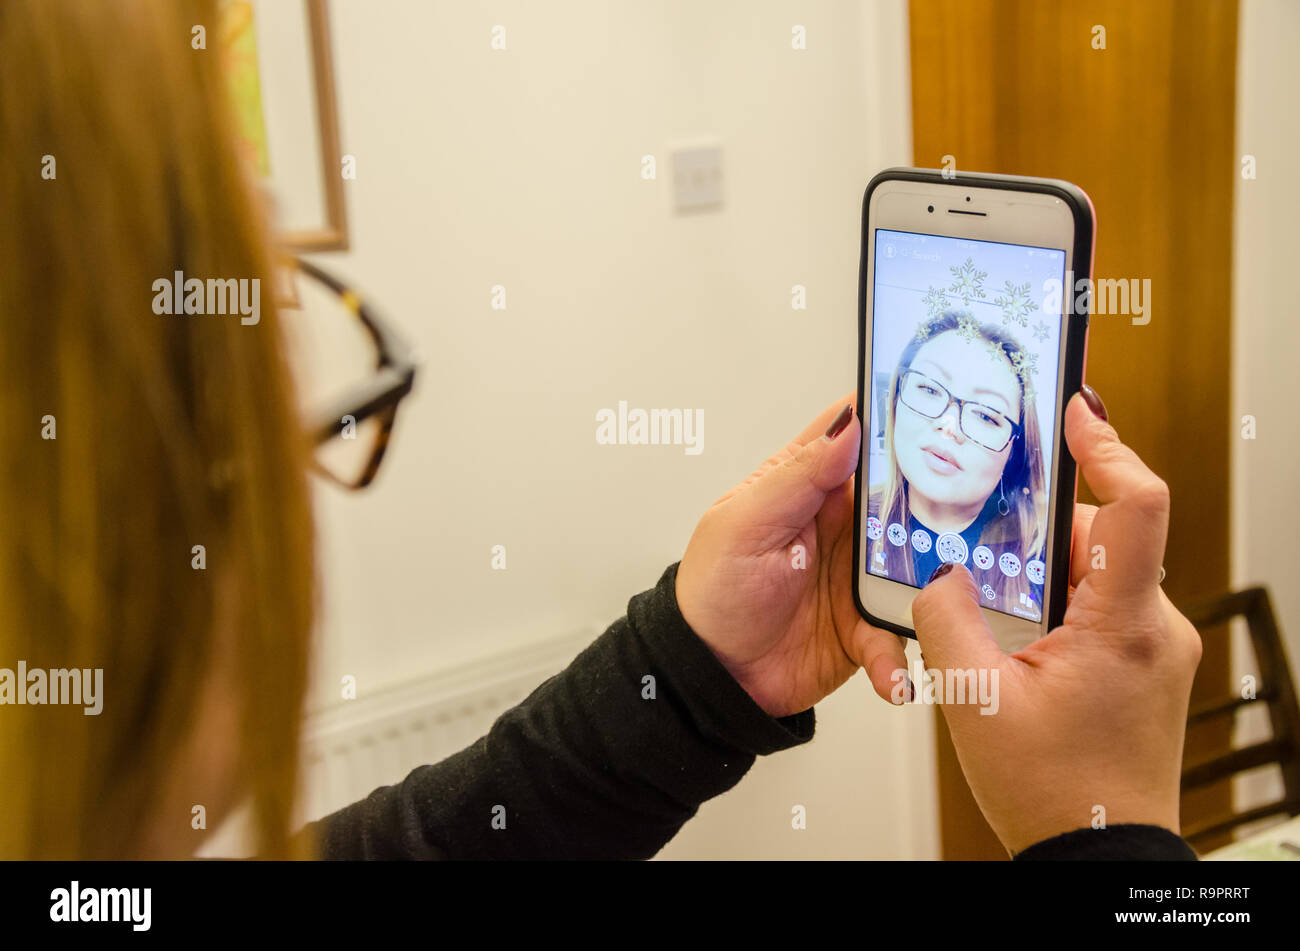 a lady takes a selfie using Snapchat on an iPhone which augments the image with effects Stock Photo